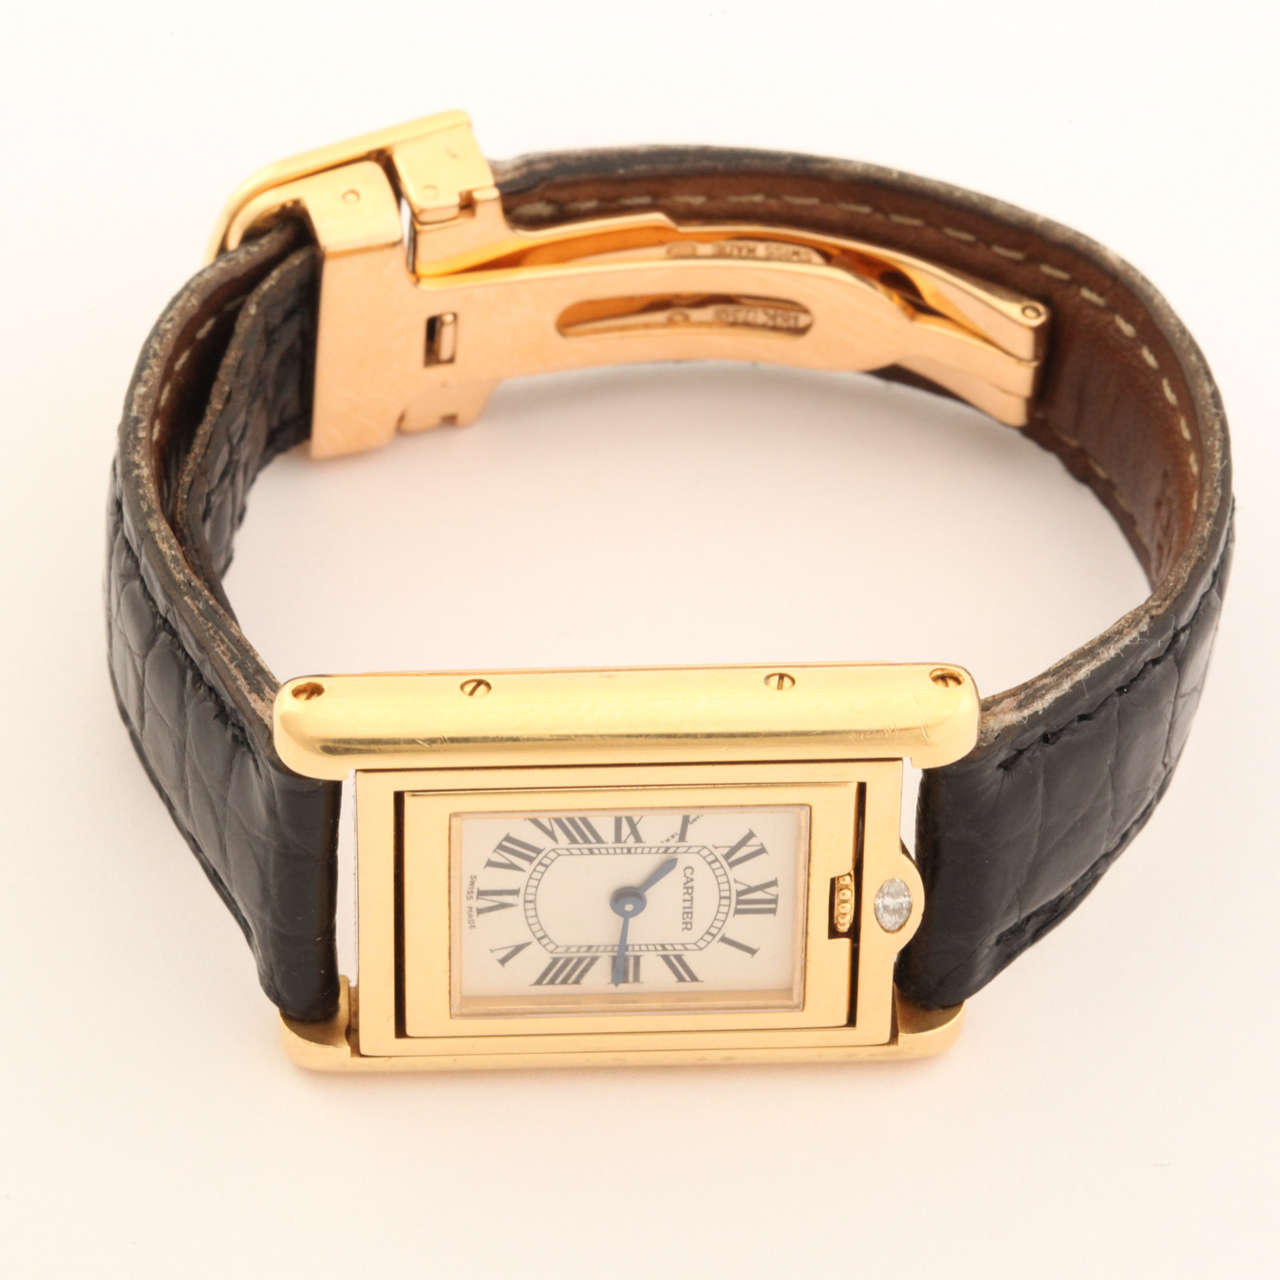 A rare Cartier Lady's 18k Yellow Gold and Diamond Tank Basculante Collection Privee Wristwatch, circa 1999. Instead of the classic sapphire detailing, this watch has a specially cut diamond in its place.  This is the place to lift the reversible the